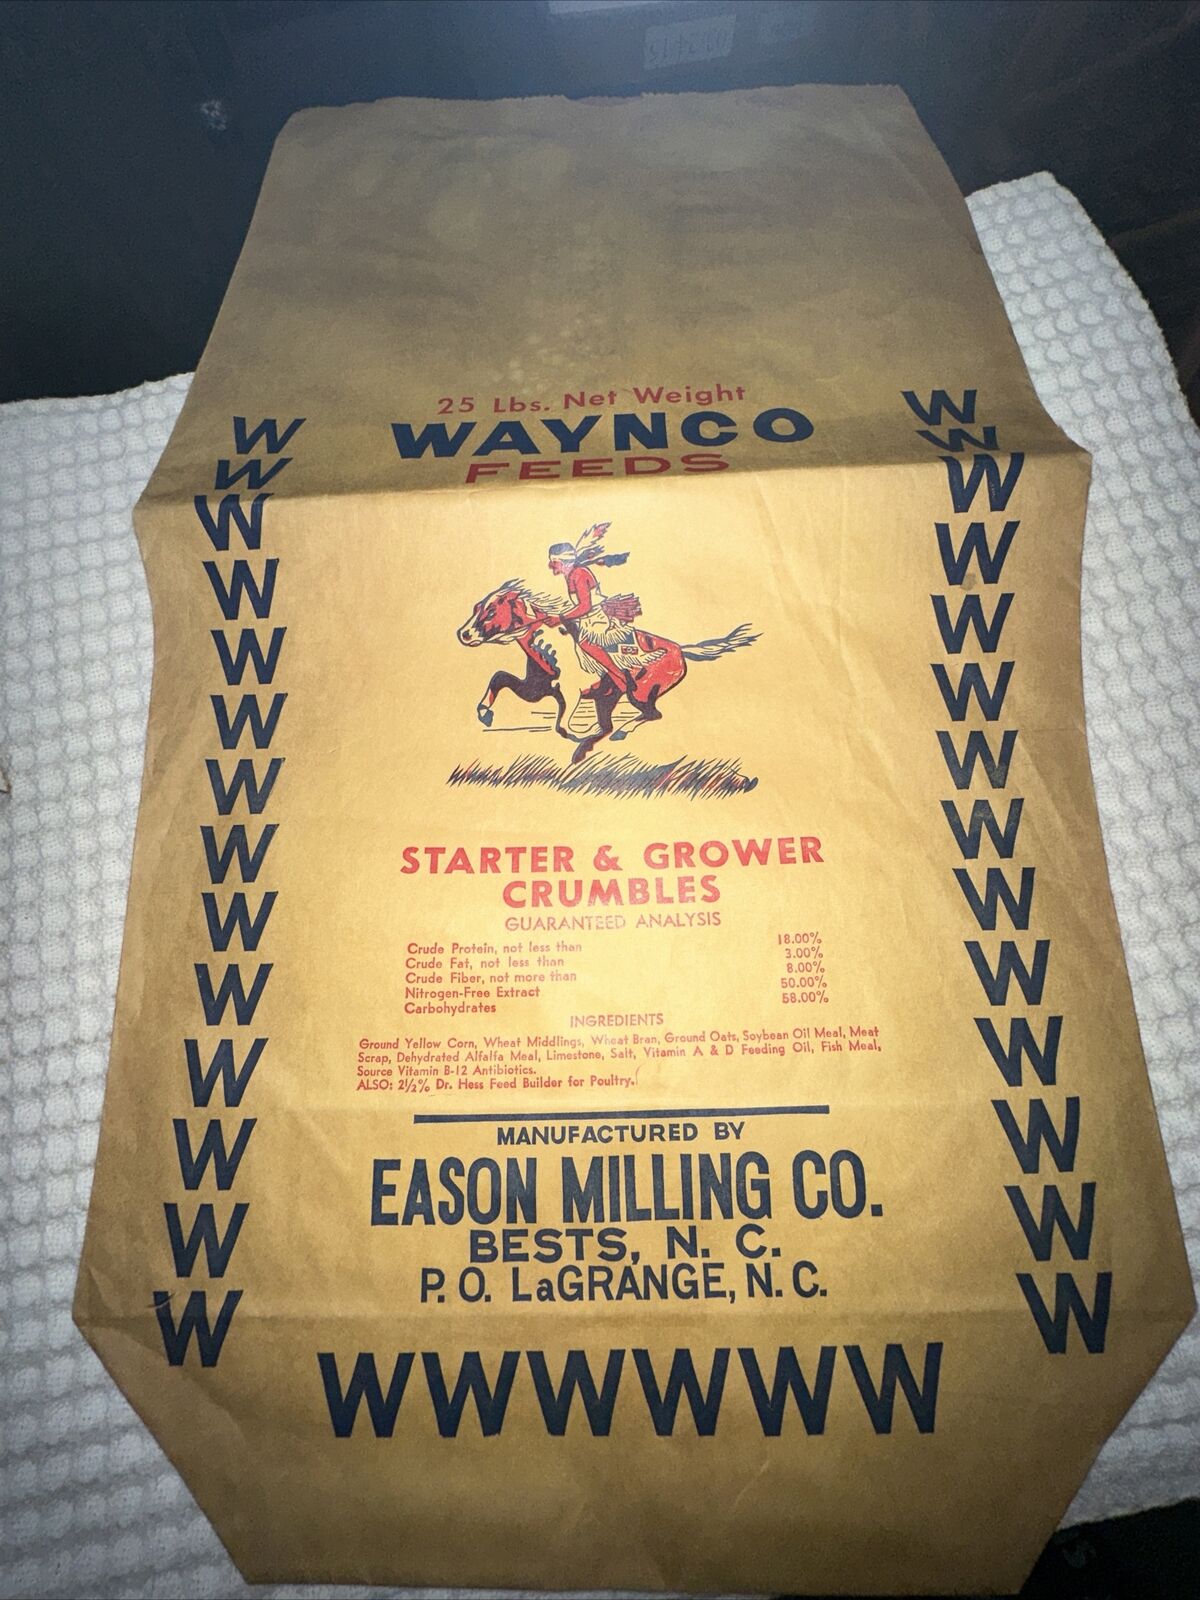 Waynco Feeds -Empty Bag- “Starter & Grower Crumbles” Poultry. Eason Milling Co.